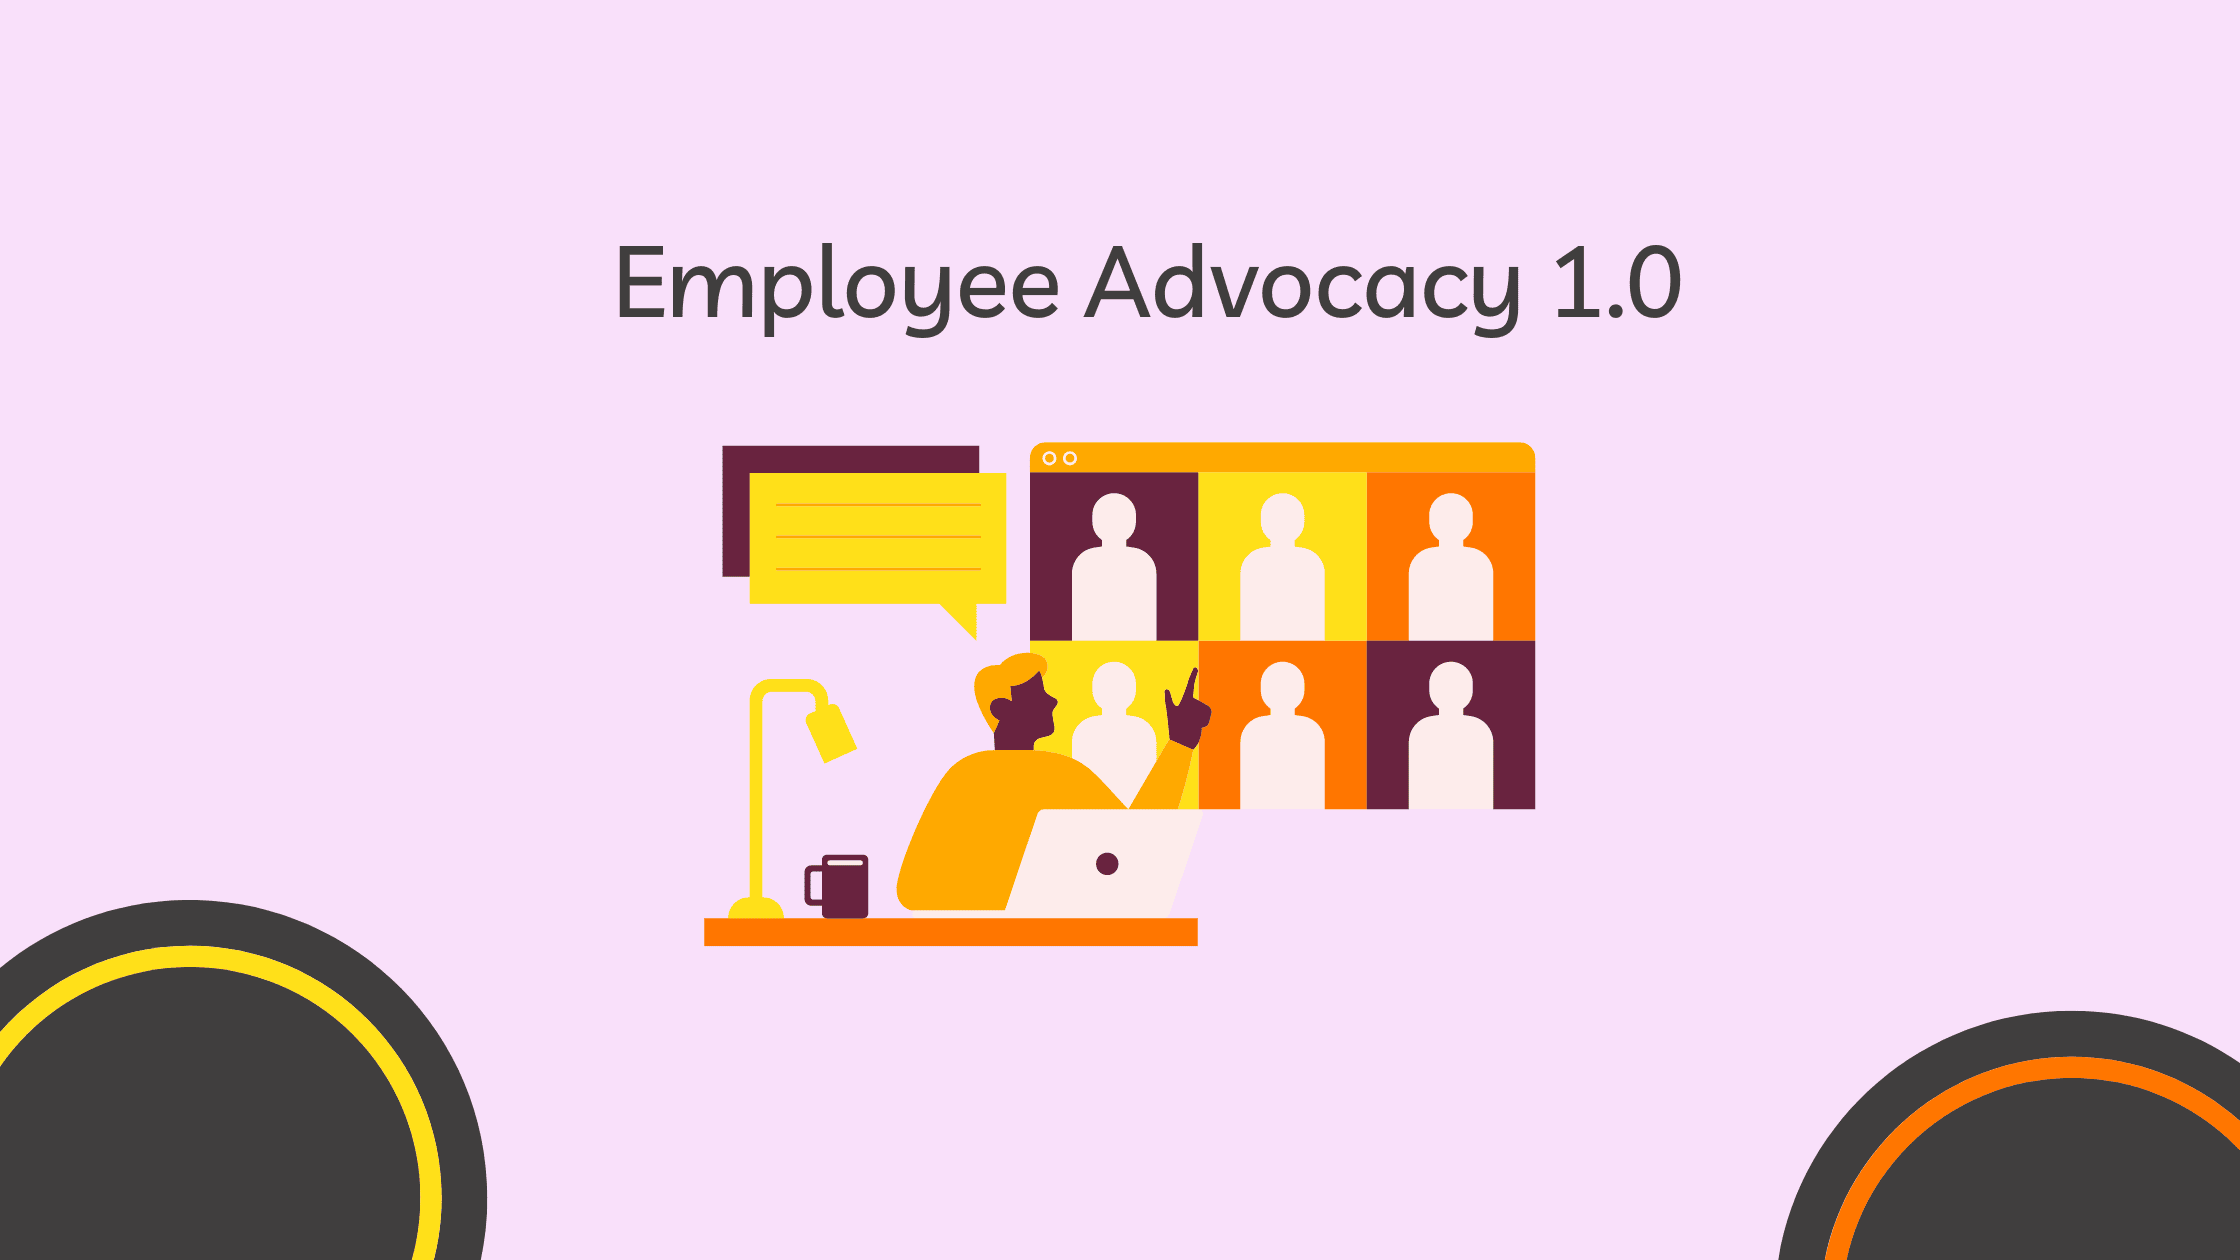 Your Company on Employee Advocacy 1.0